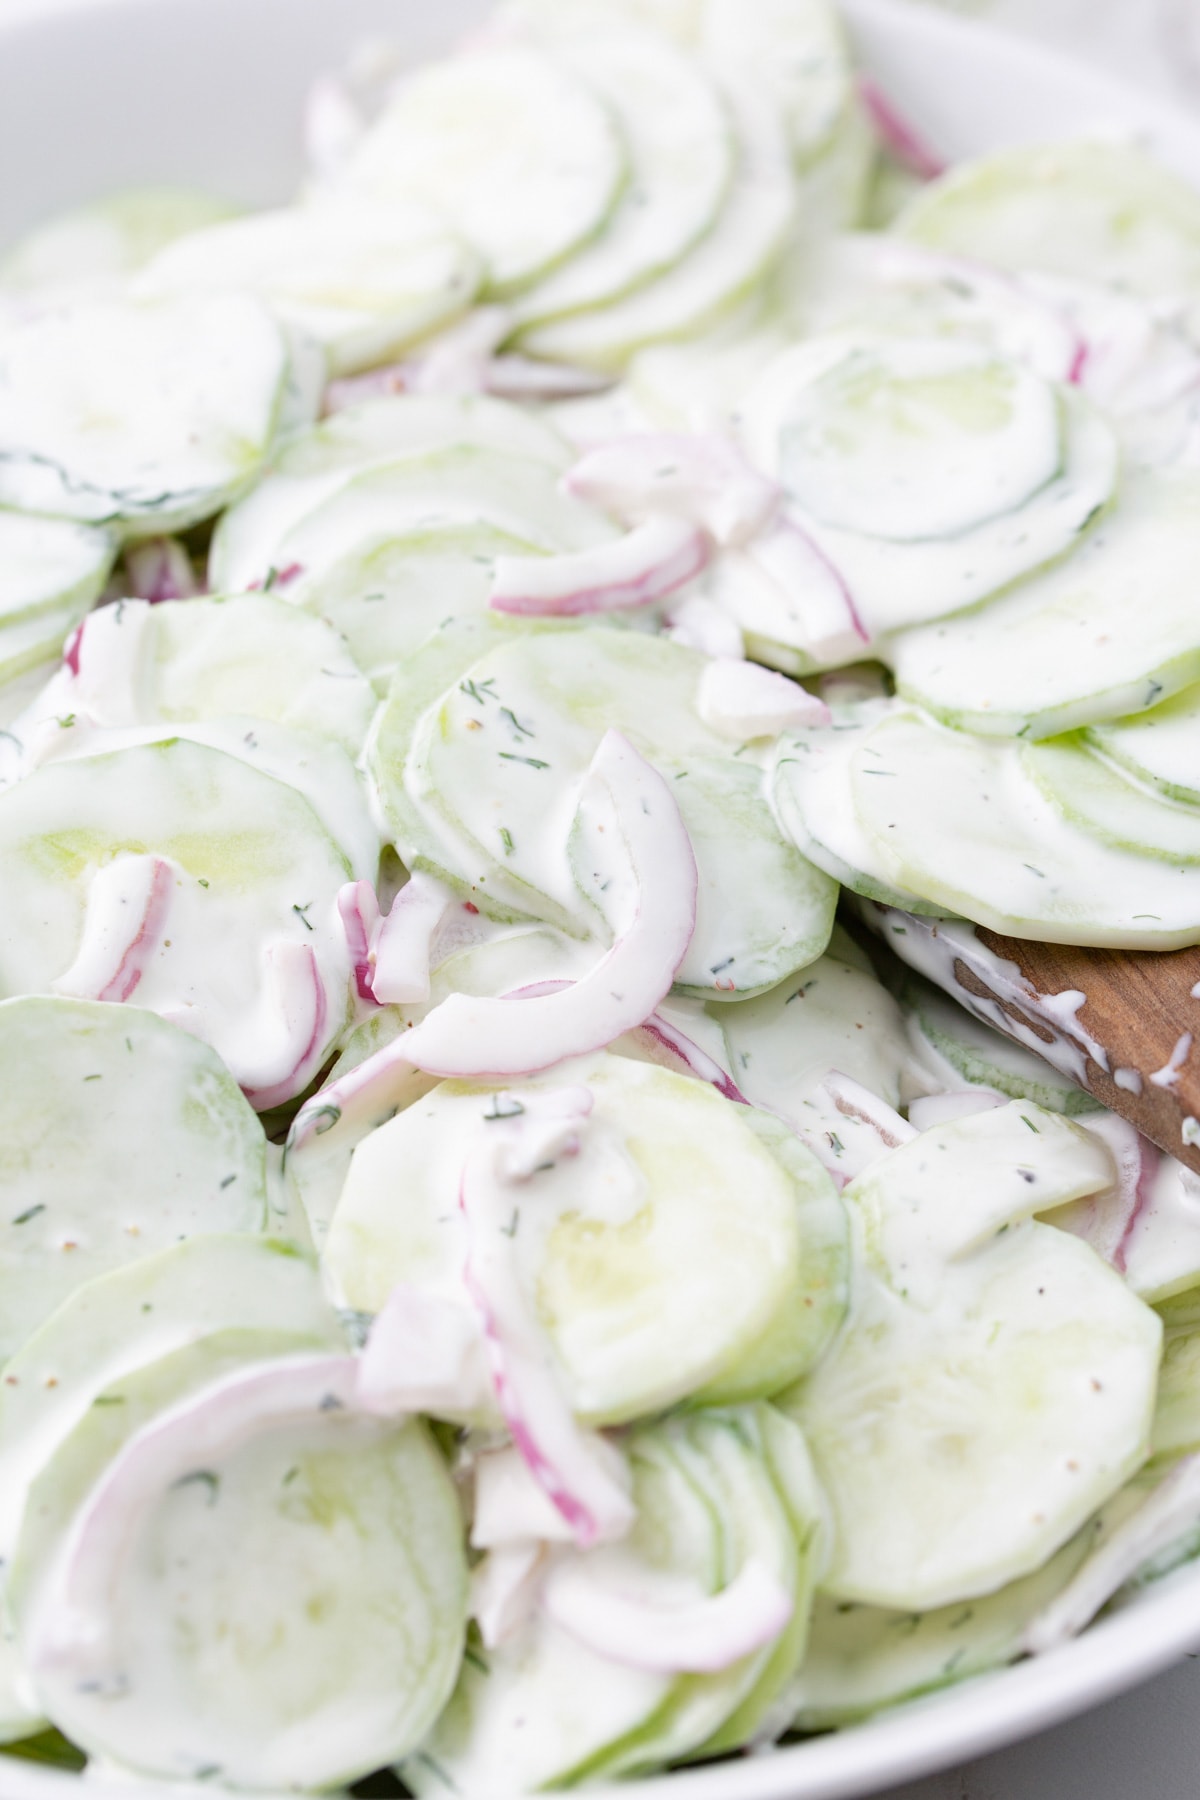 Creamy cucumber salad in a white serving bowl topped with fresh dill.